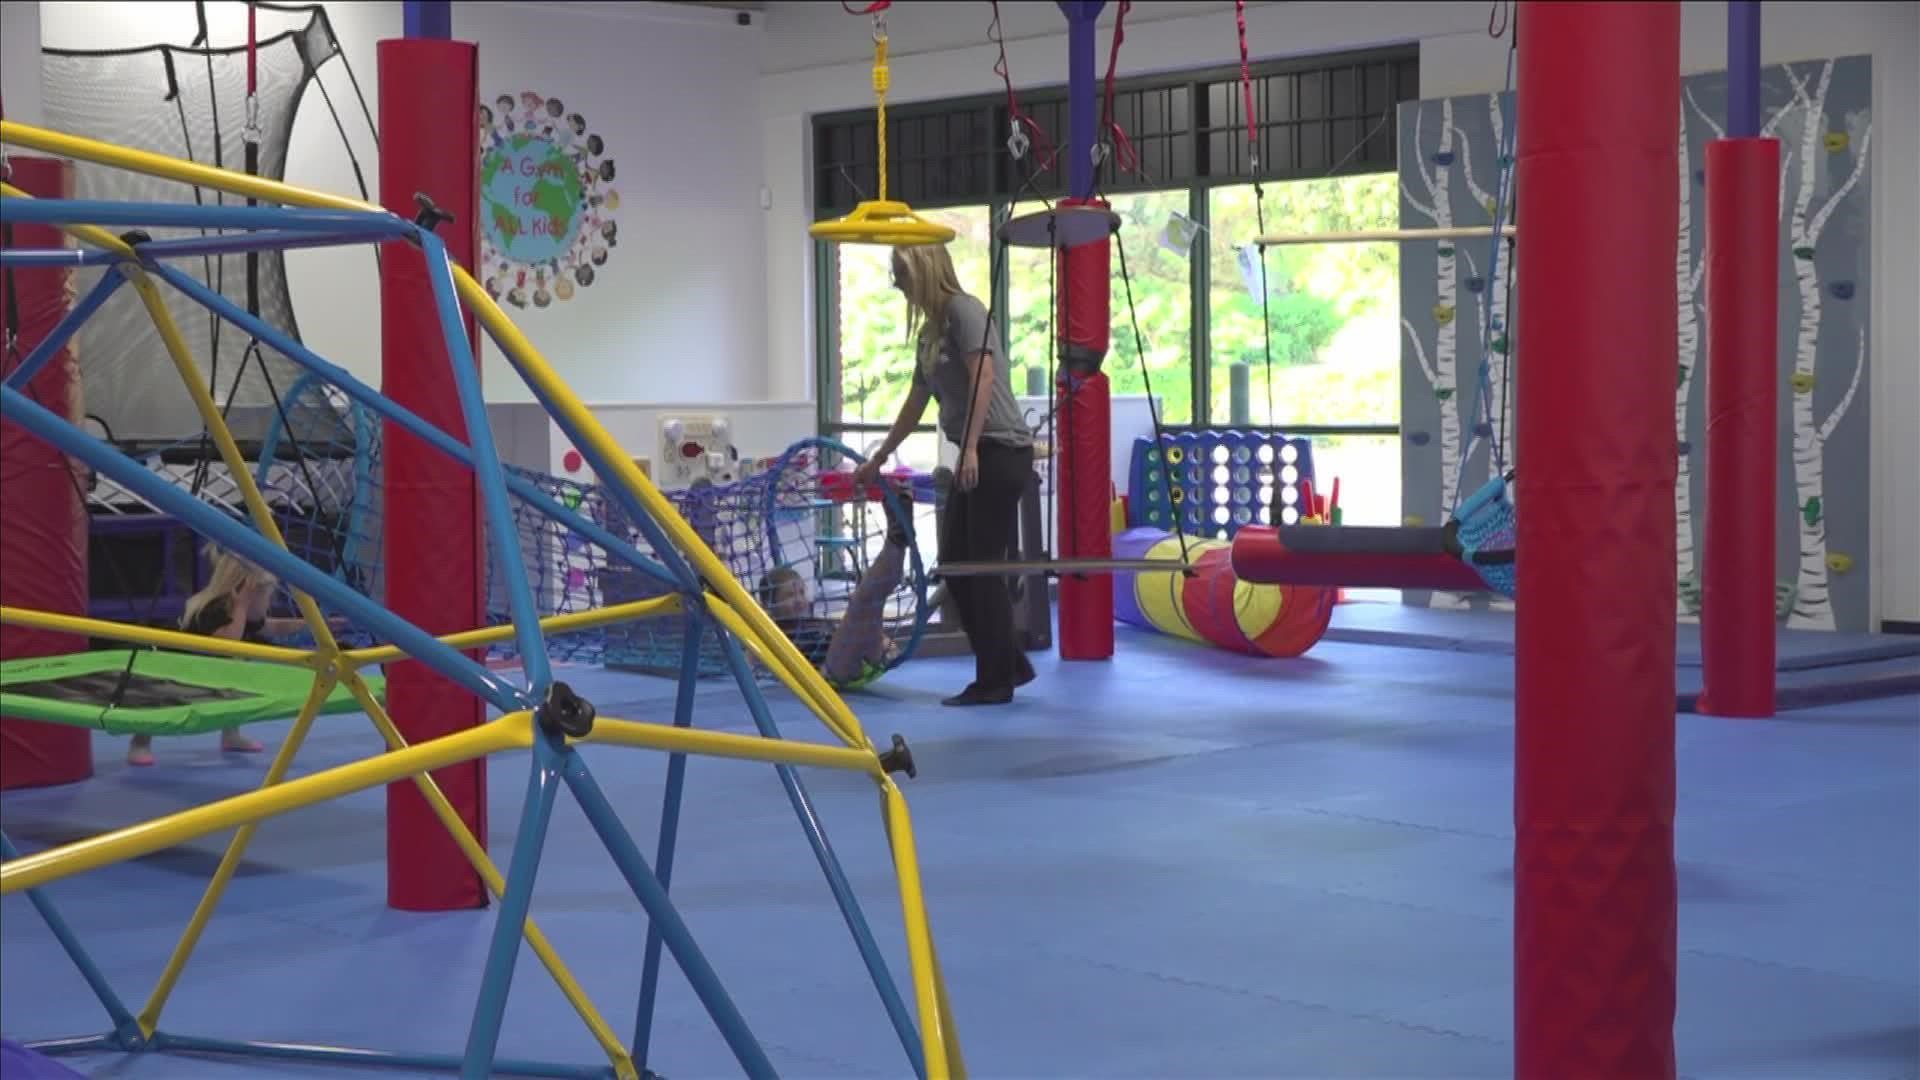 Complete with a calming room, a new children's gym is opening in Cordova that caters to inclusion. Special needs children can learn and play at We Rock the Spectrum.